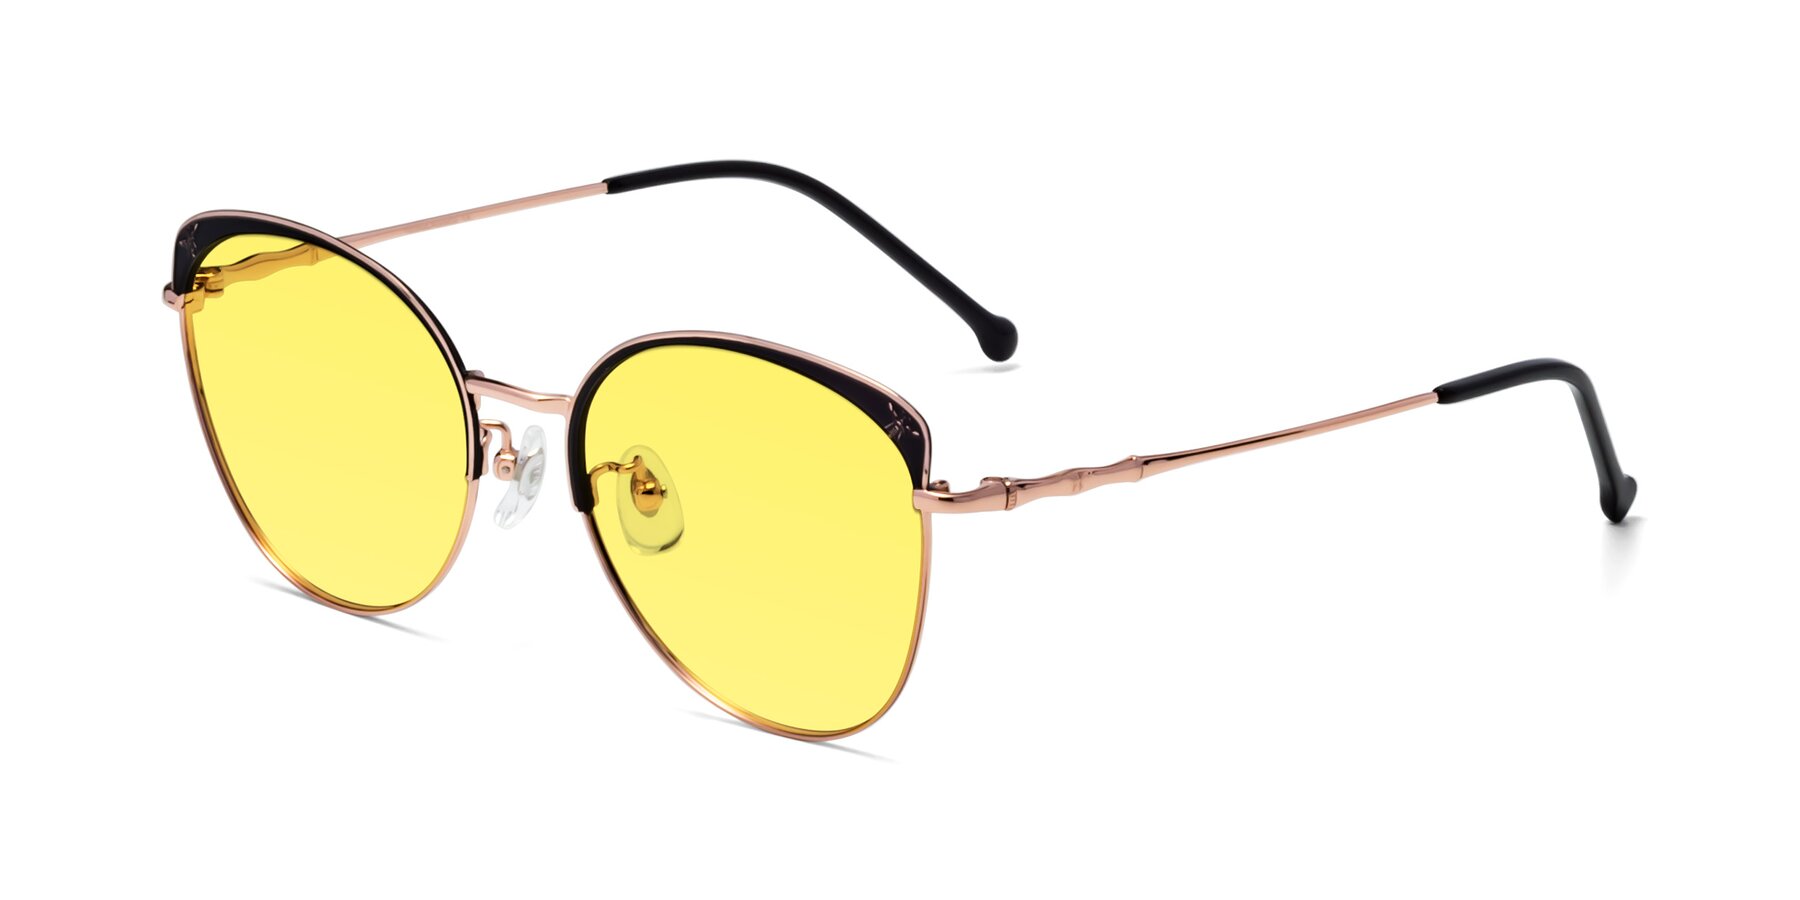 Angle of 18019 in Black-Rose Gold with Medium Yellow Tinted Lenses